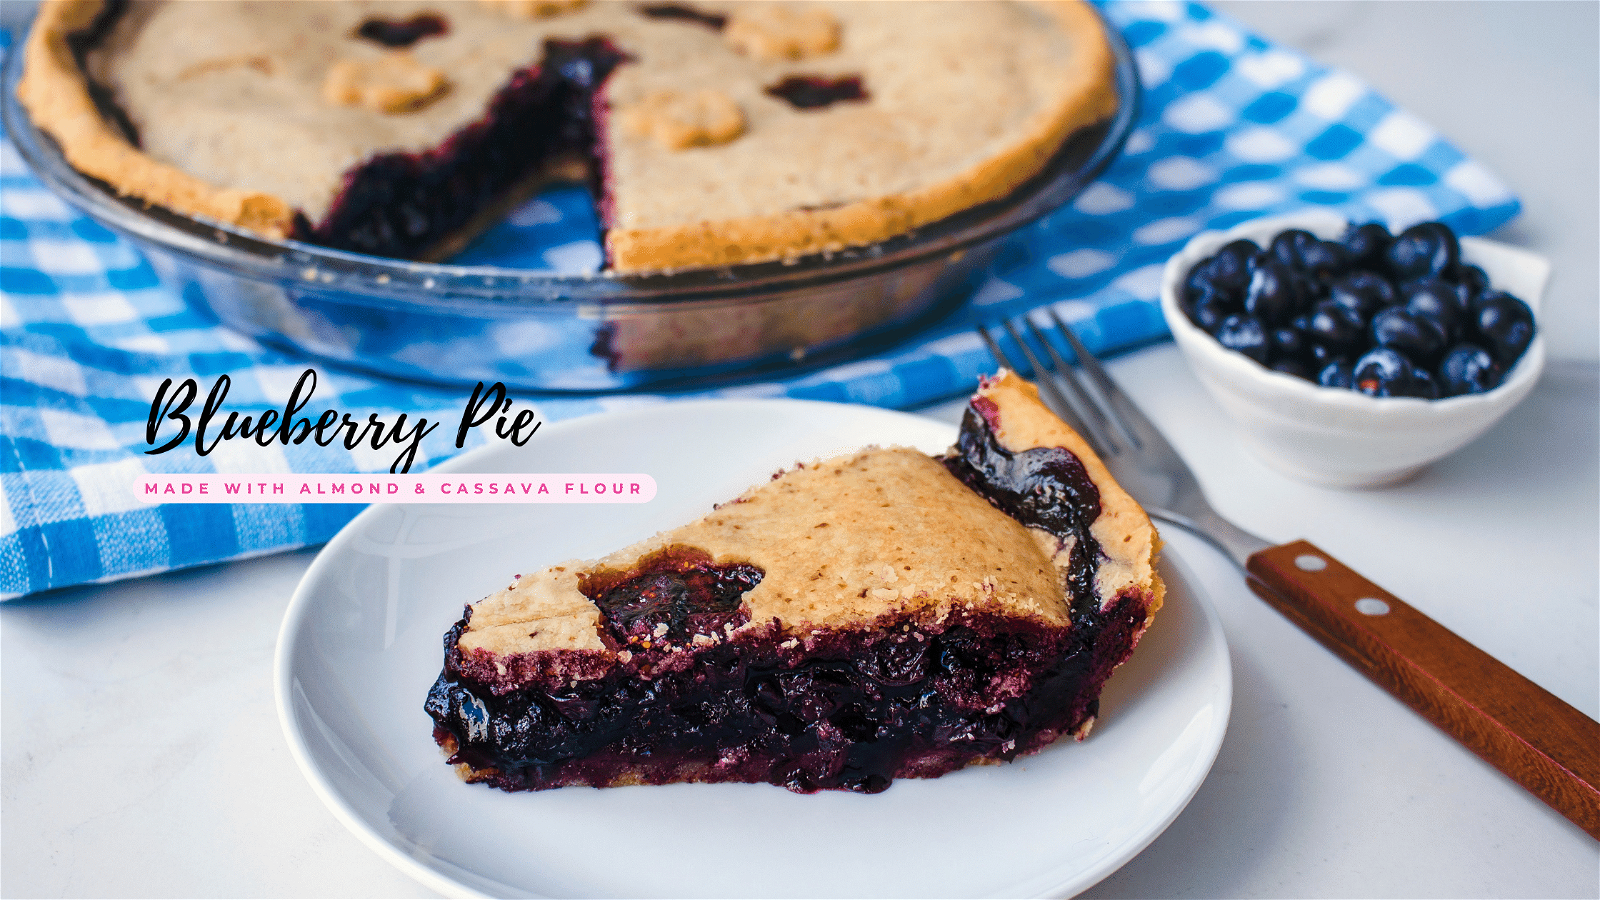 Image of Blueberry Pie made with Almond & Cassava Flour